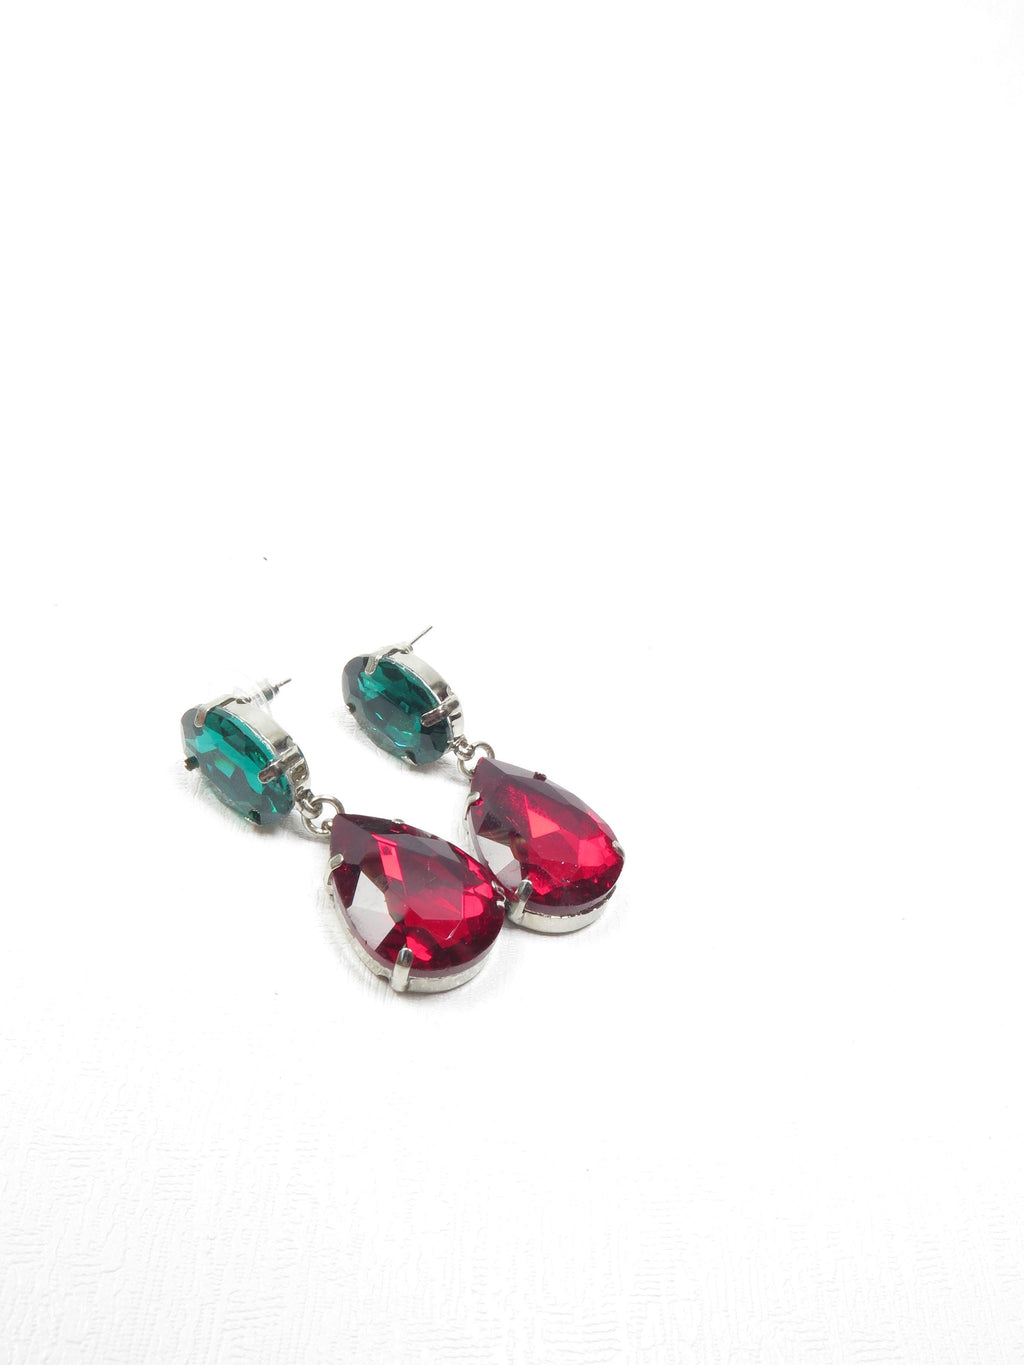 Vintage Style Drop Green & Red Earrings - The Harlequin